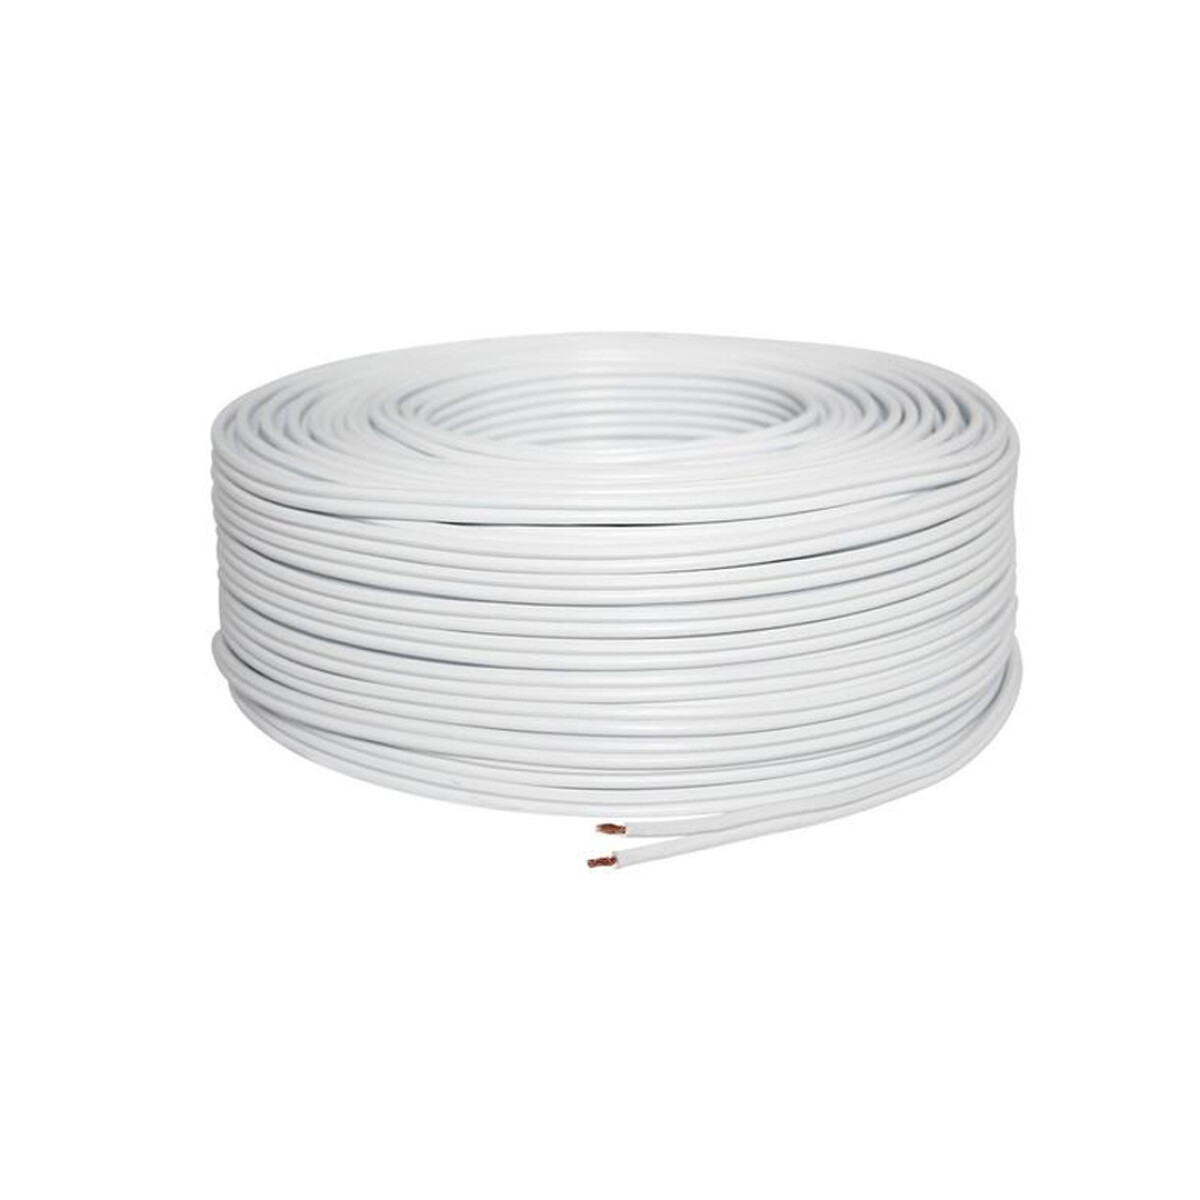 Cable Gemelo - 0,5 mm Blanco 